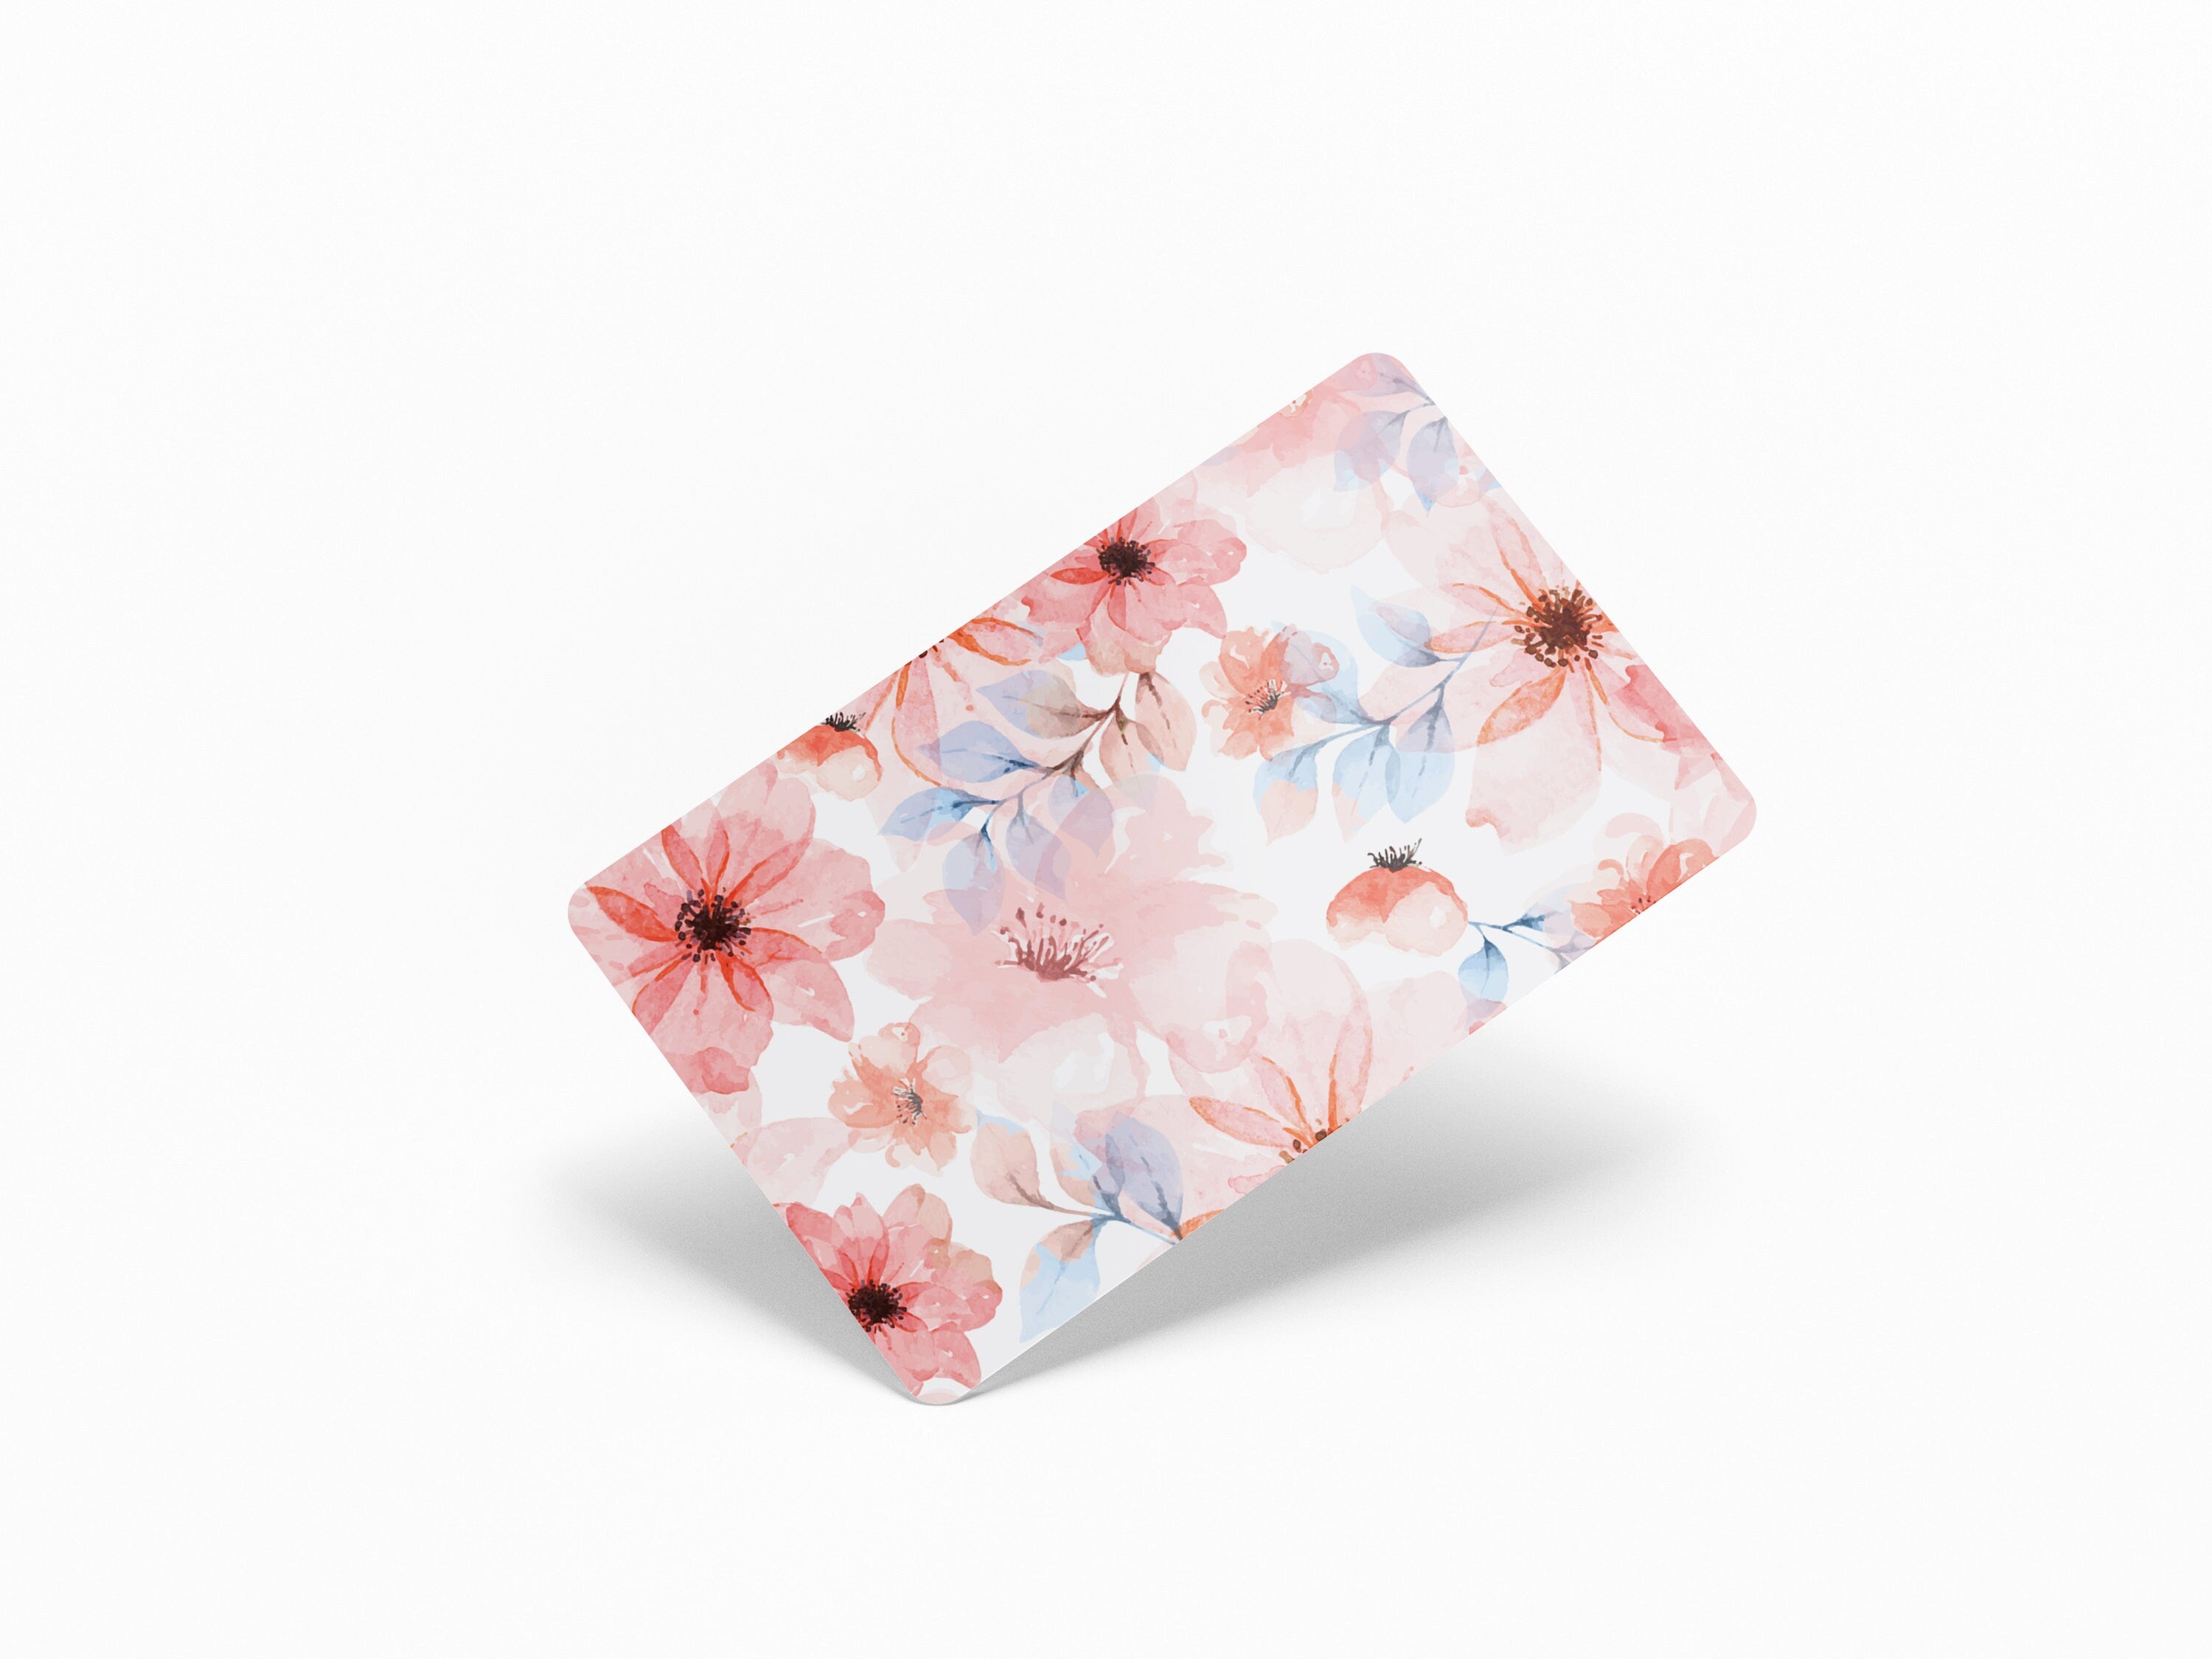 4PCS Credit Card Skin Flowers, Includes 4 variations for Debit